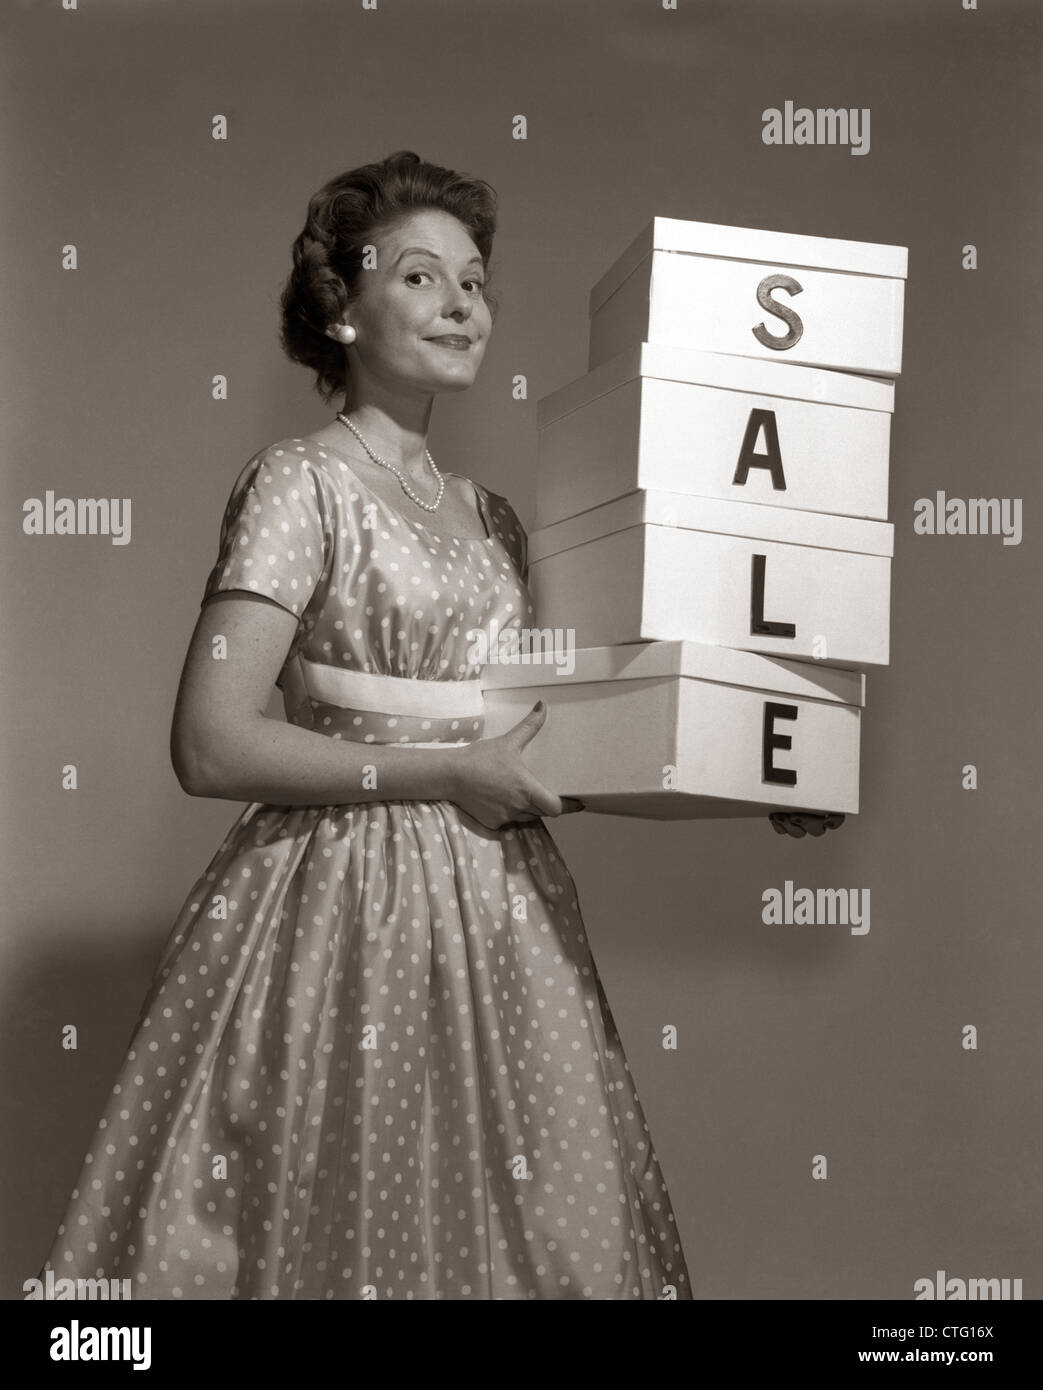 1960s WOMAN IN POLKA-DOT DRESS LOOKING AT CAMERA HOLDING A STACK OF 4 BOXES WITH ONE CHARACTER CENTERED ON EACH SPELLING SALE Stock Photo